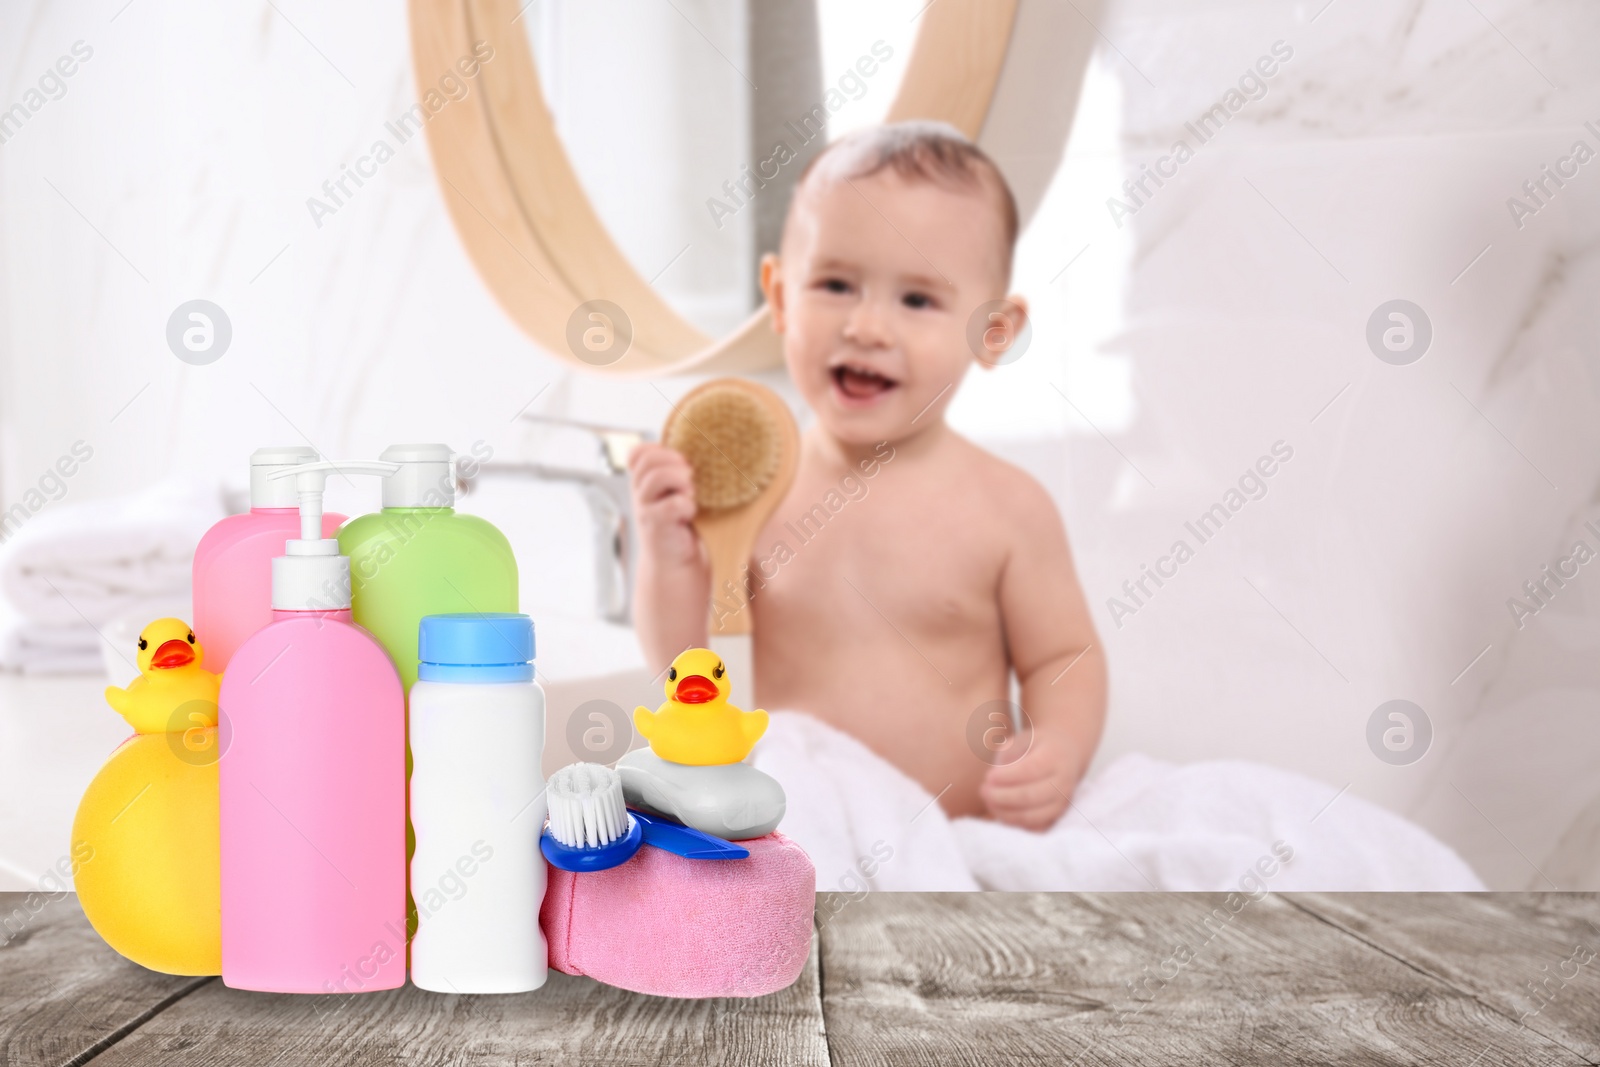 Image of Baby cosmetic products, toys and bathing accessories on table in bathroom